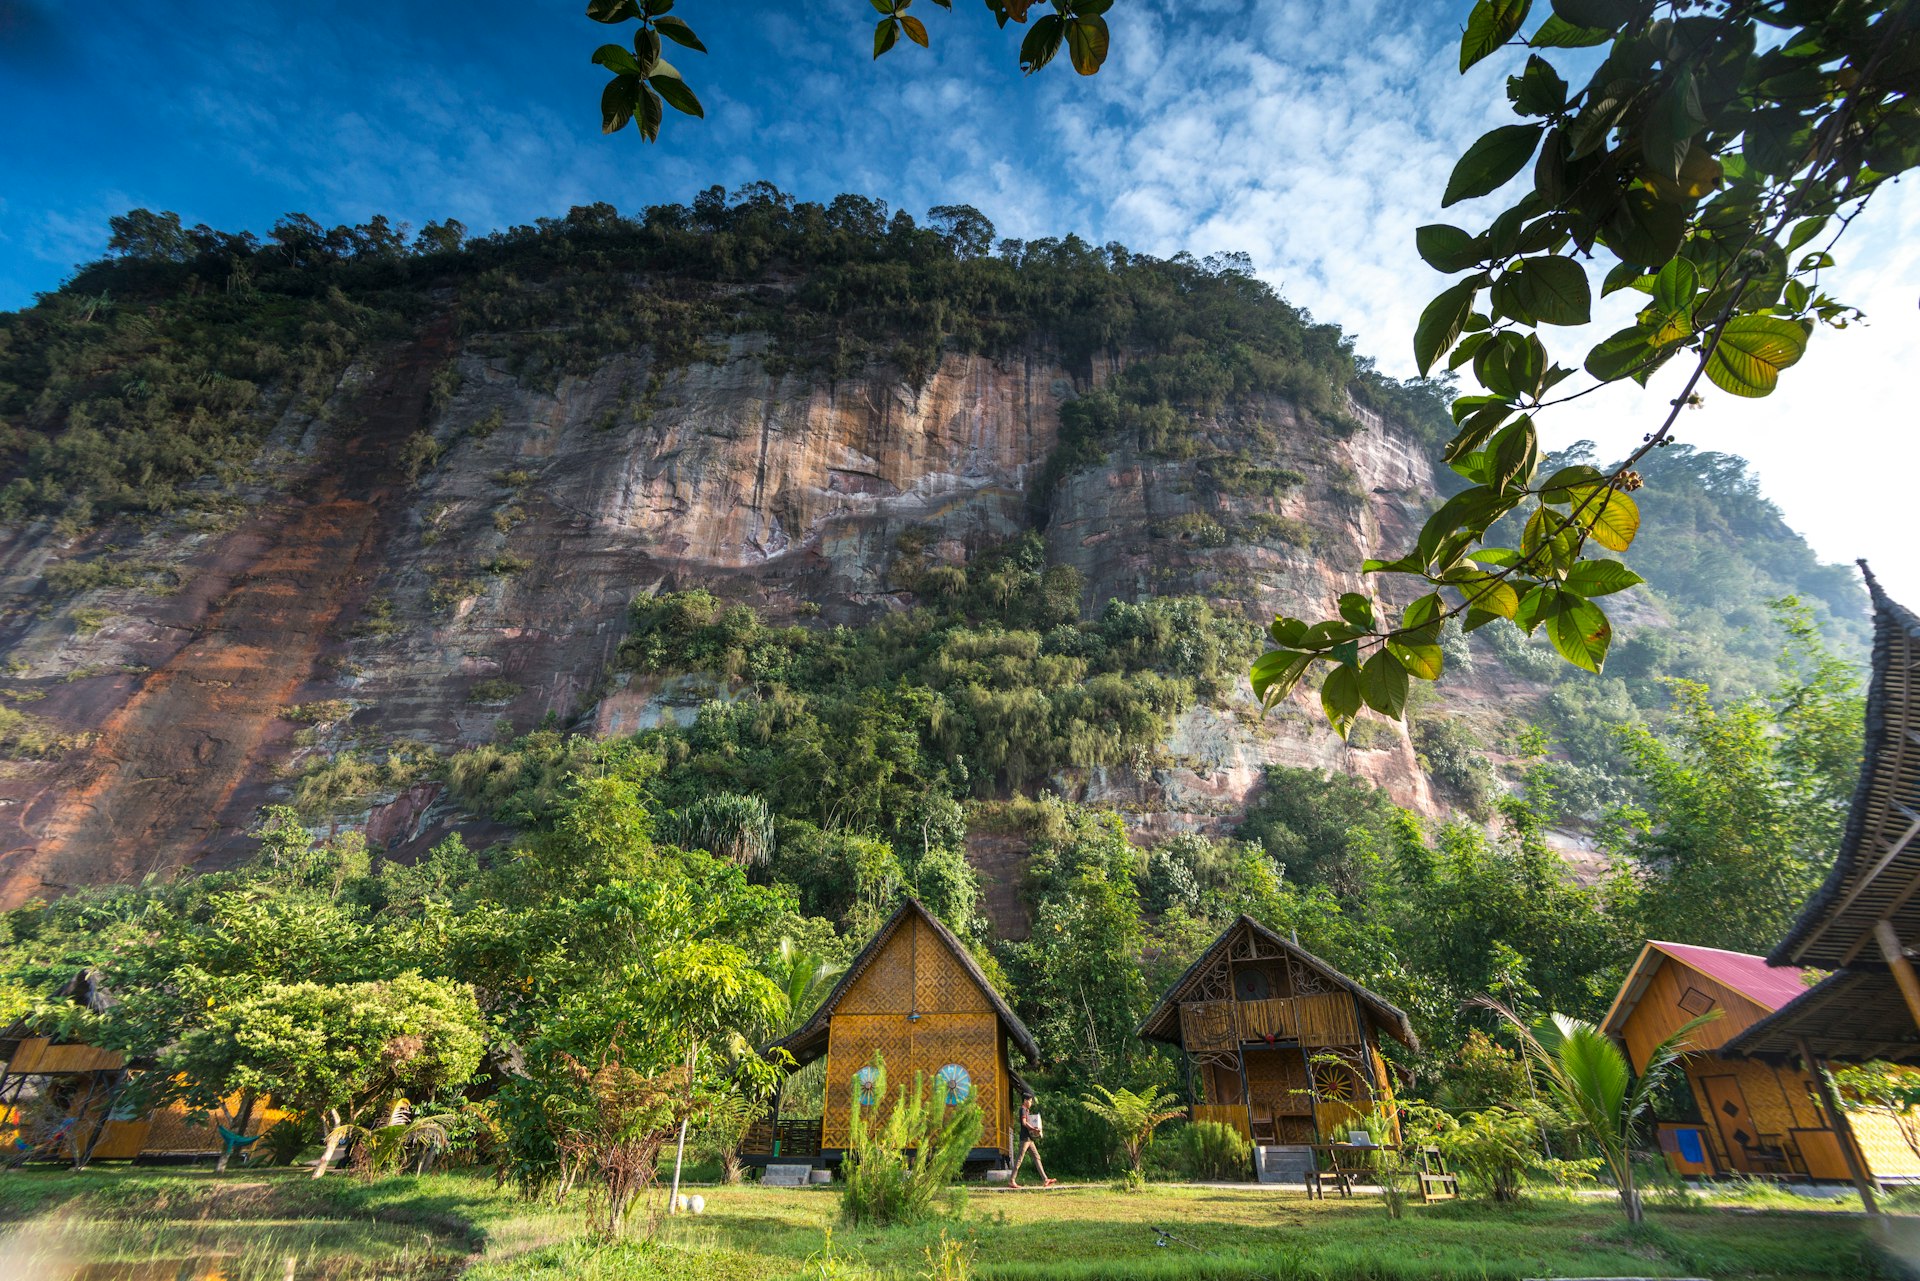 A series of wooden huts stand at the foot of a large cliff in a jungle